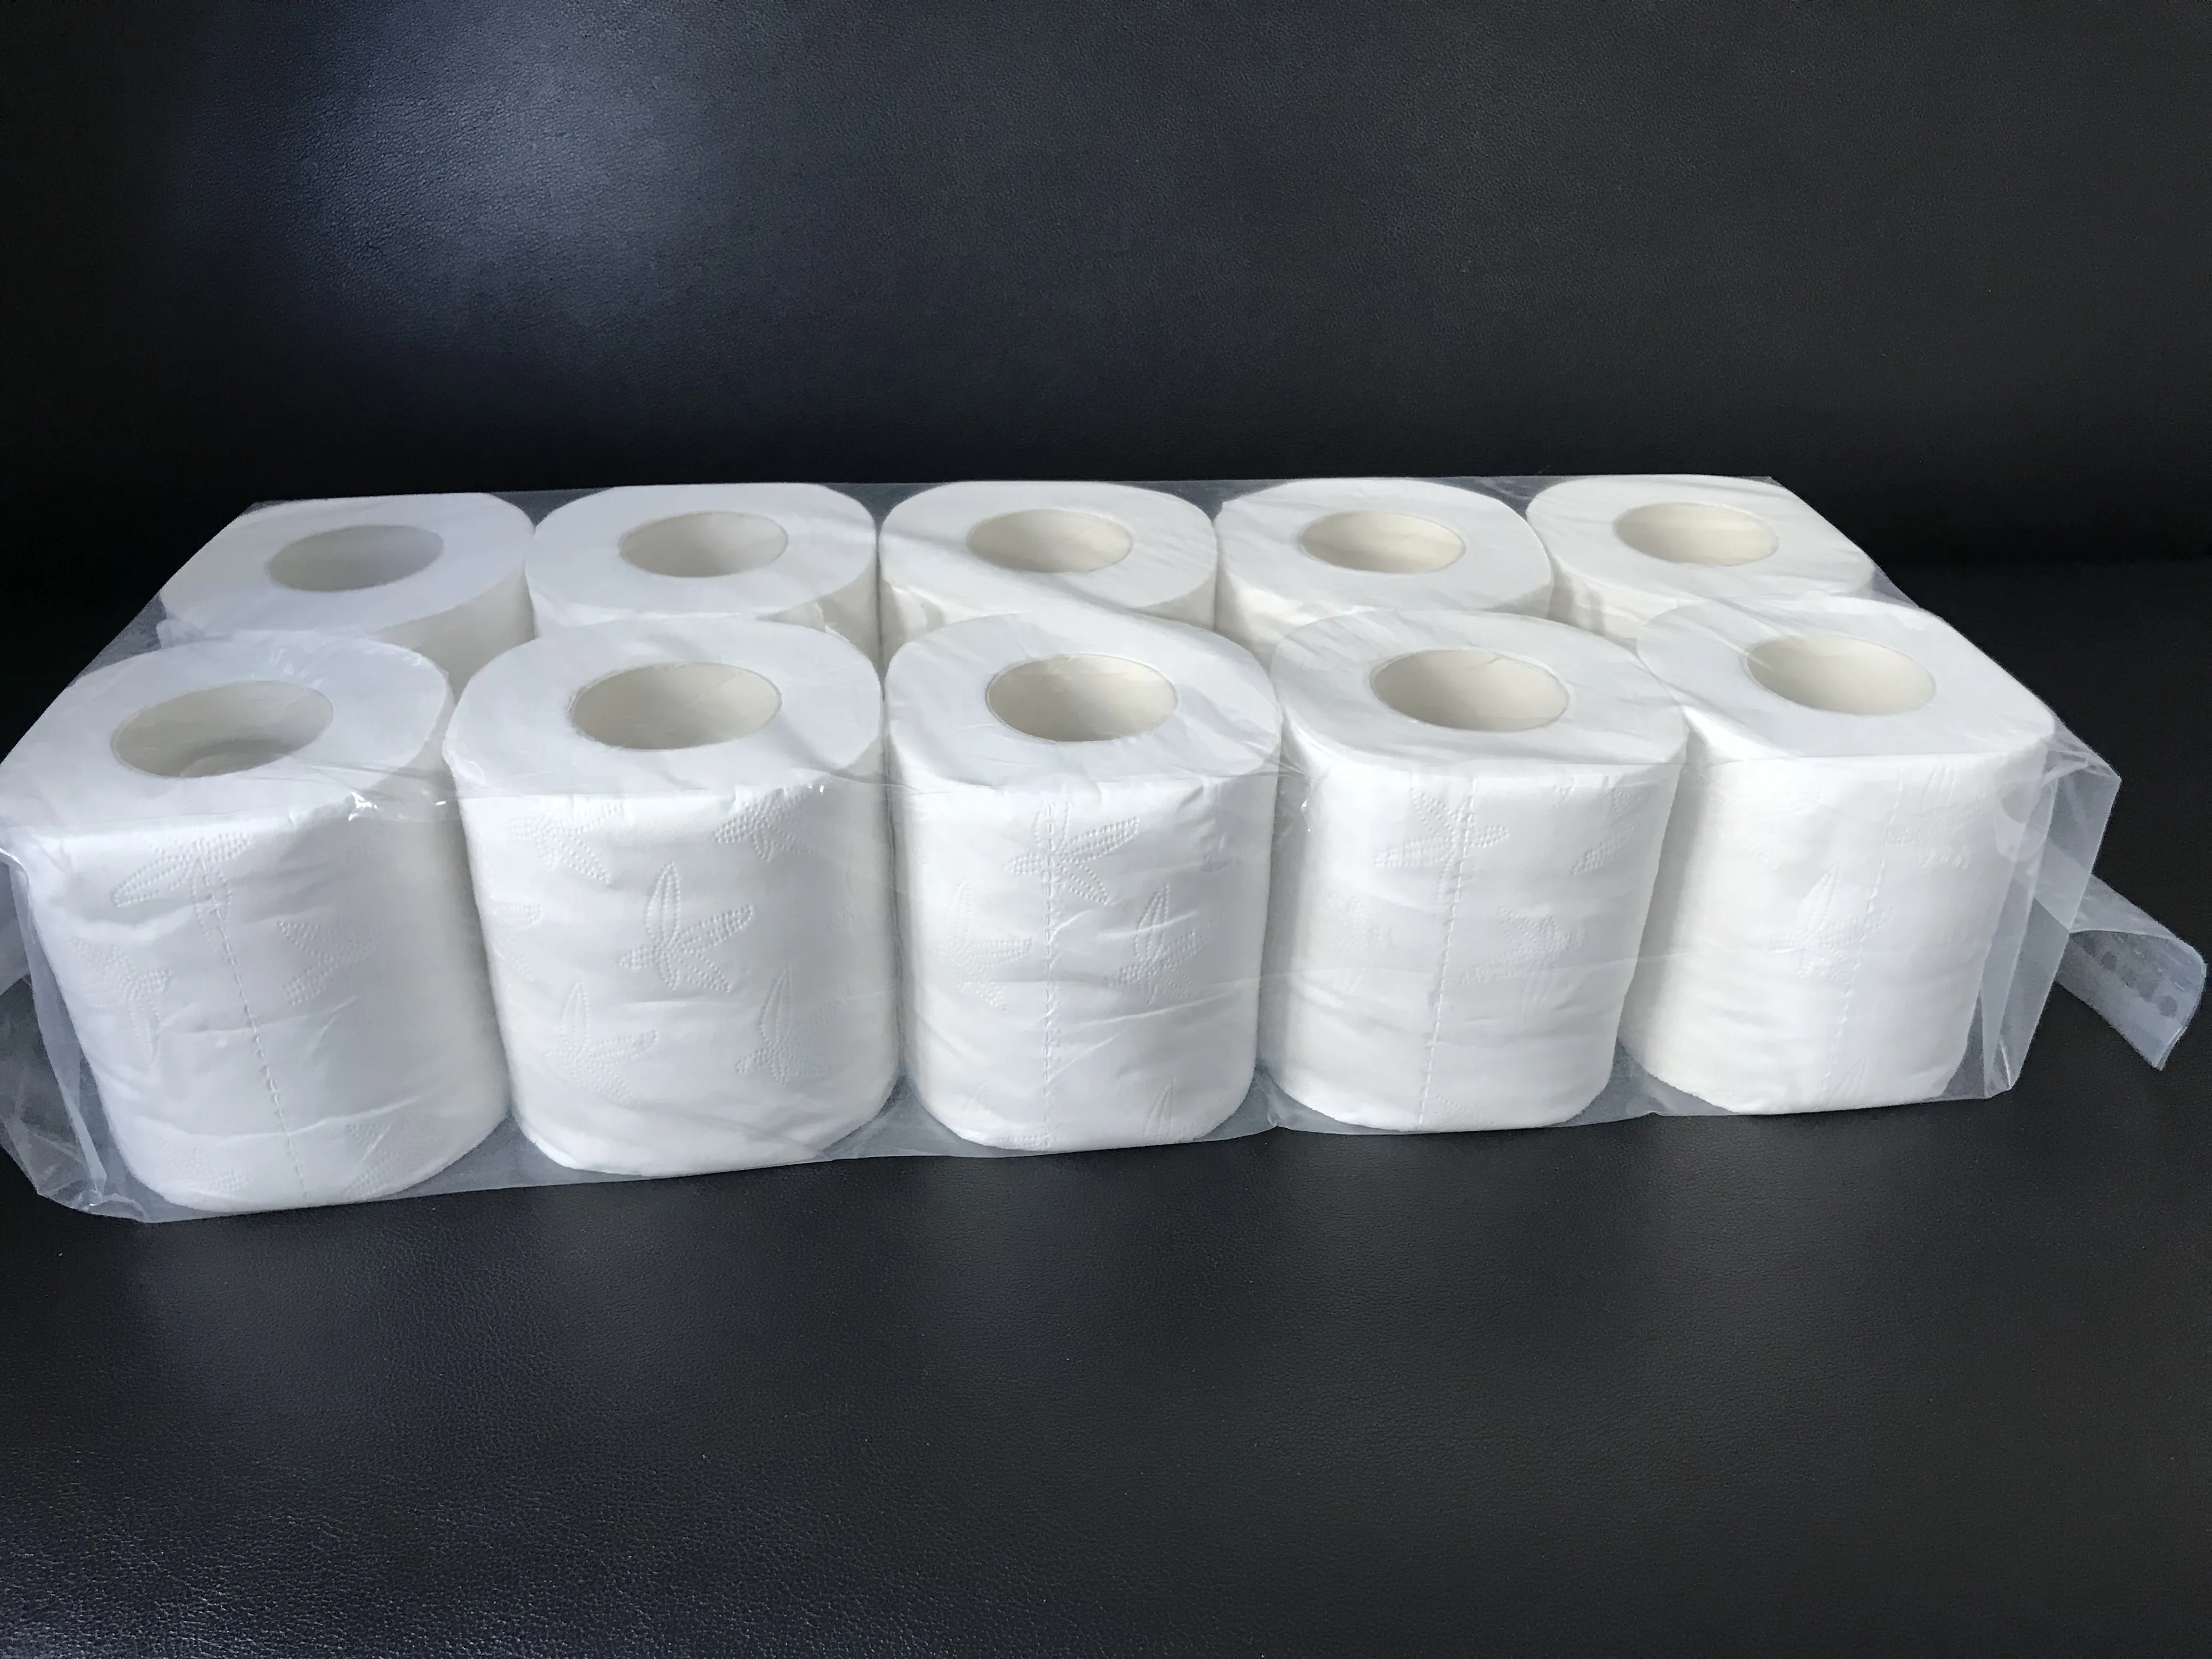 China  low price 100% virgin wood pulp 3ply toilet paper rolls tissue soft fsc